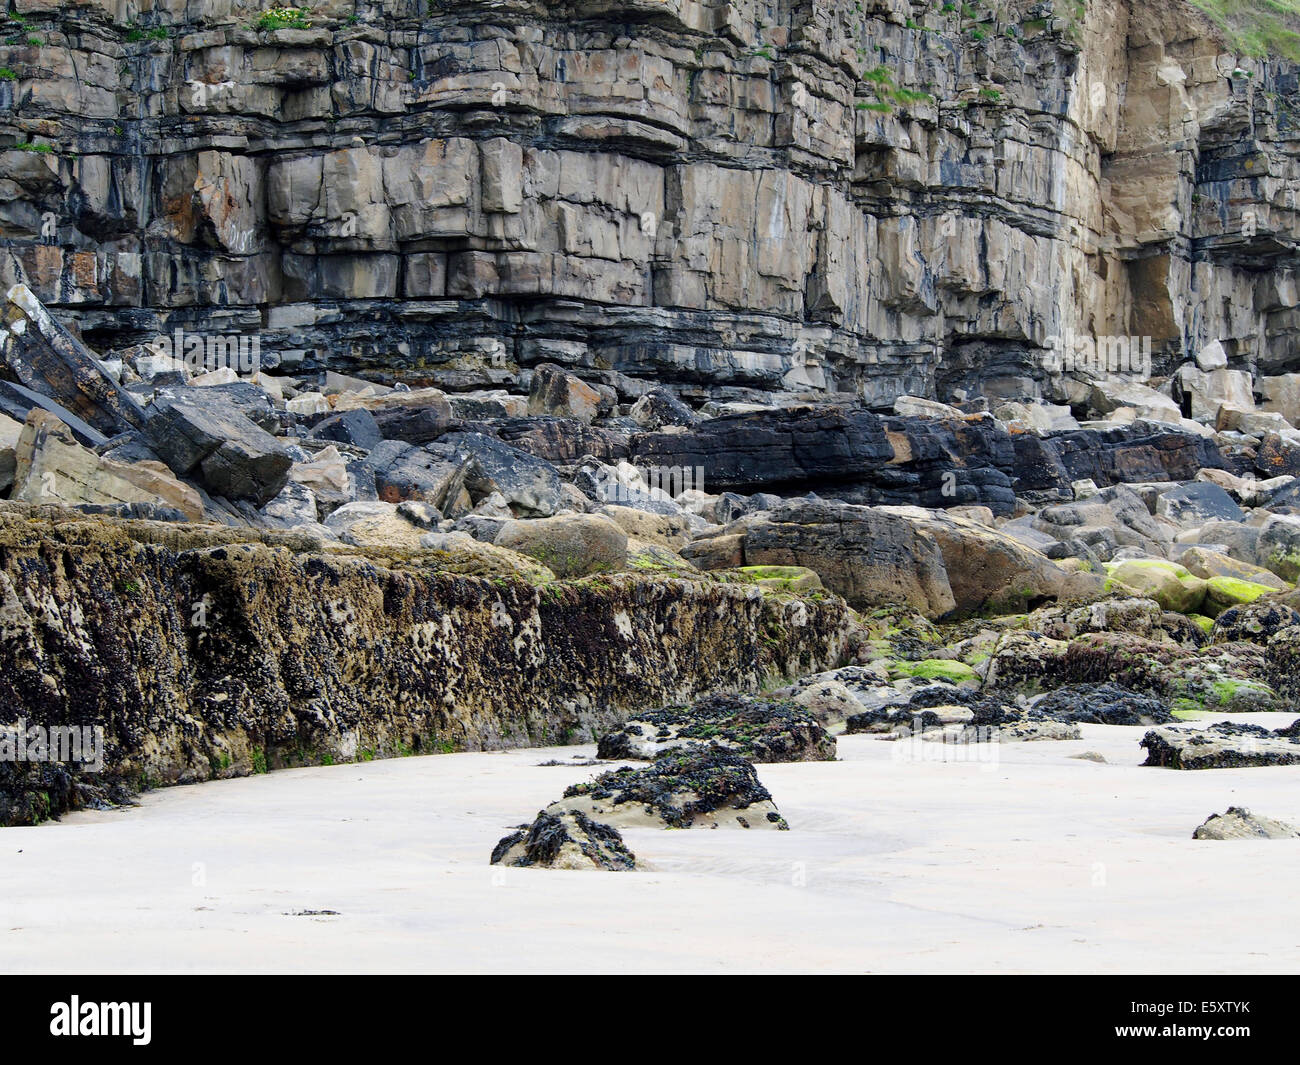 Cliff with horizontally bedded strata and a wave cut platform at the base near Mullaghmore, County Sligo, Ireland Stock Photo